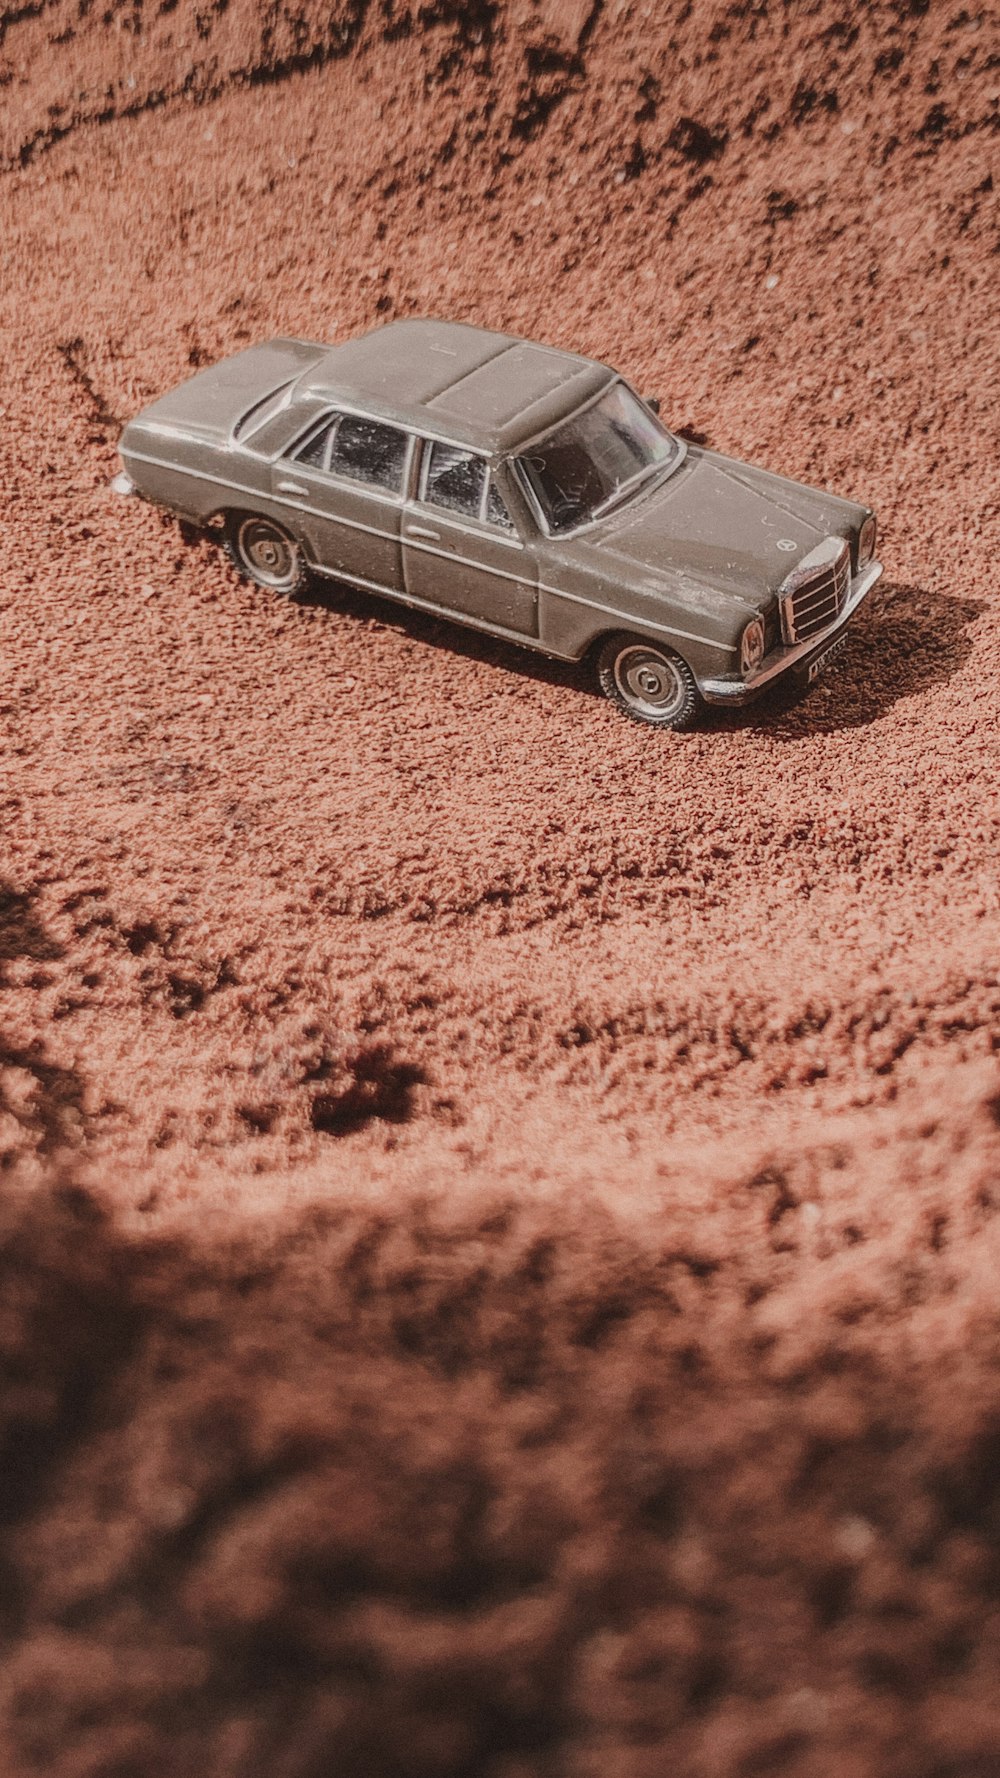 a toy car sitting in the middle of a dirt field